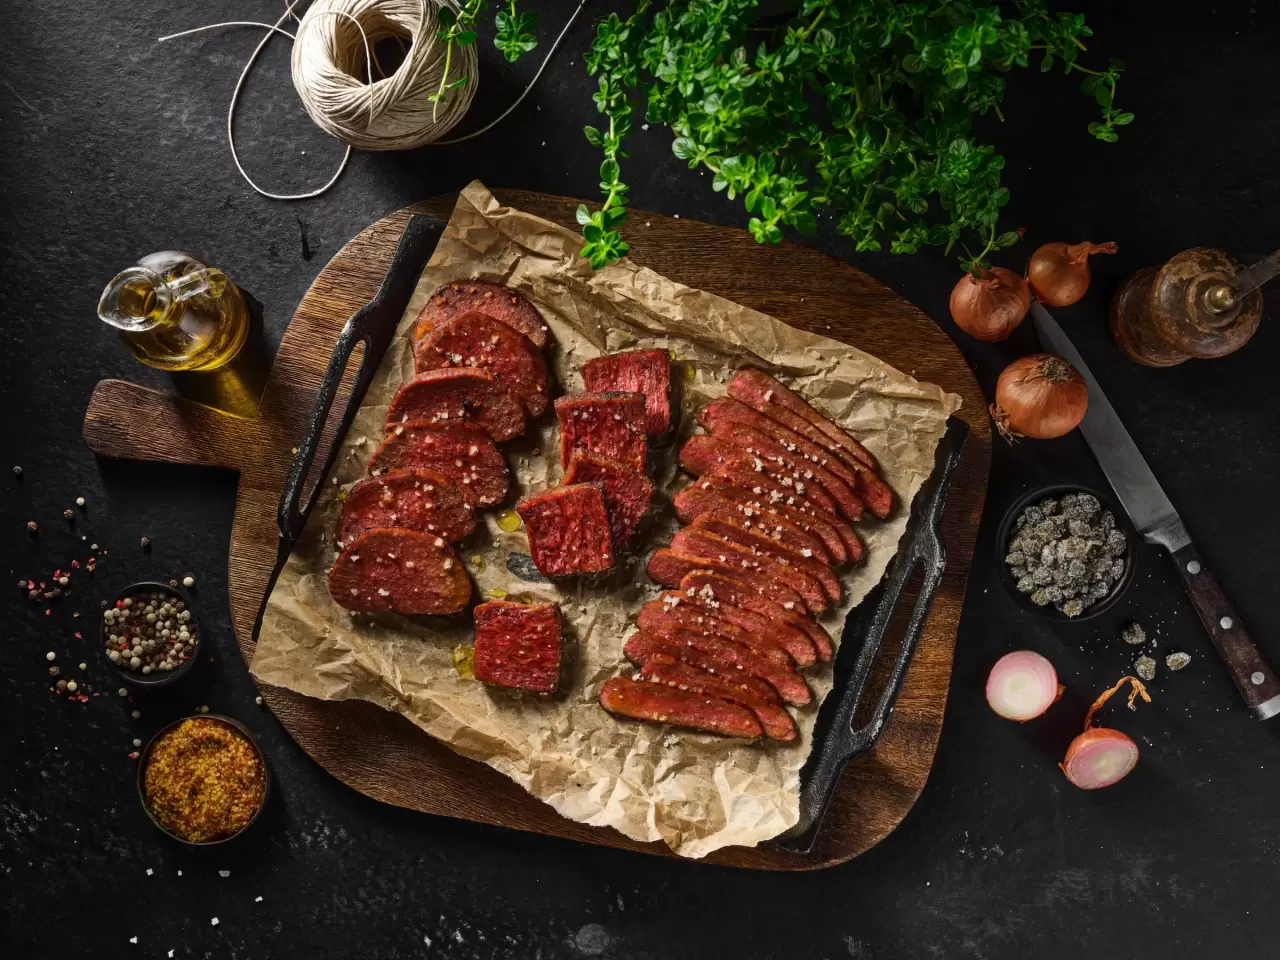 Redefine Meat unveils major New-Meat expansion with breakthrough premium cuts and first ever culinary-grade "Pulled Meat" category img#1